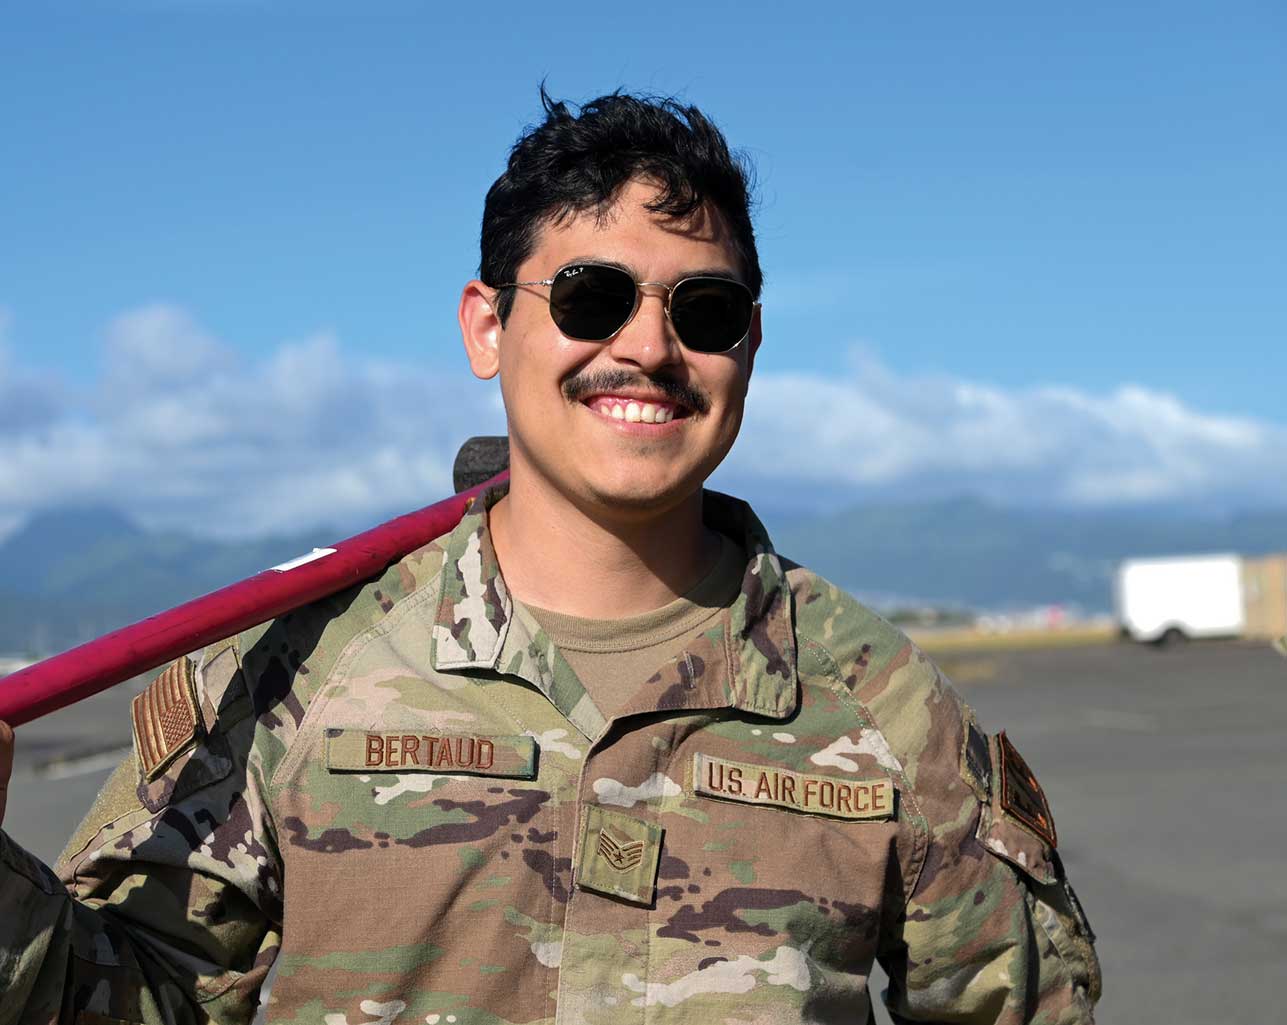 A man in military fatigues and sunglasses.